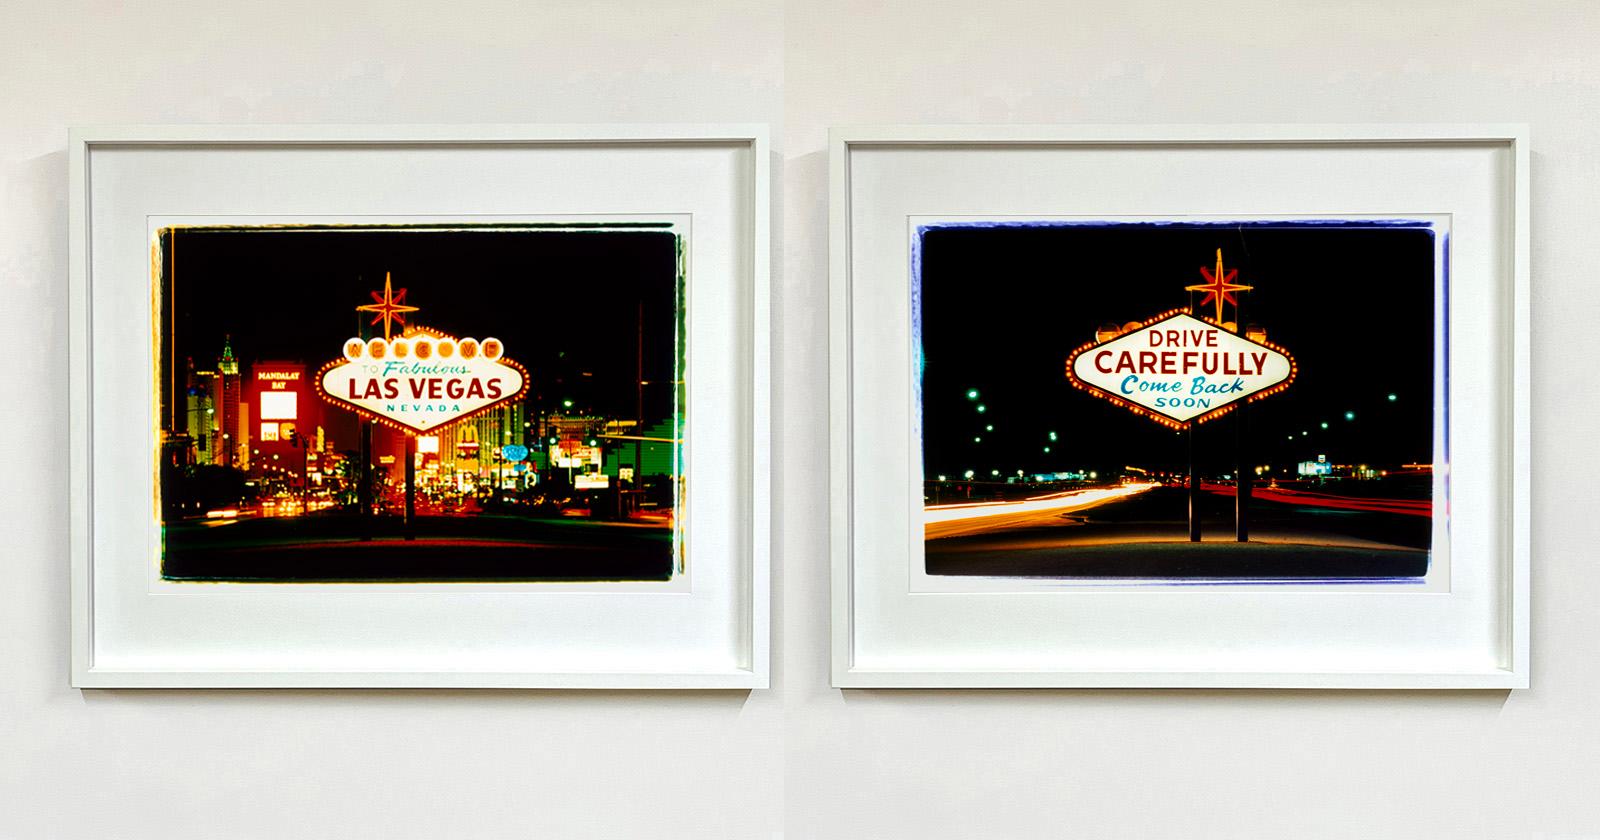 Arriving and Leaving Las Vegas, two framed American sign photographs.
From Richard Heeps' 'Dream in Colour' series, this artwork captures a classic American neon Googie sign, with the famous Vegas cityscape in the background.  

Each framed artwork